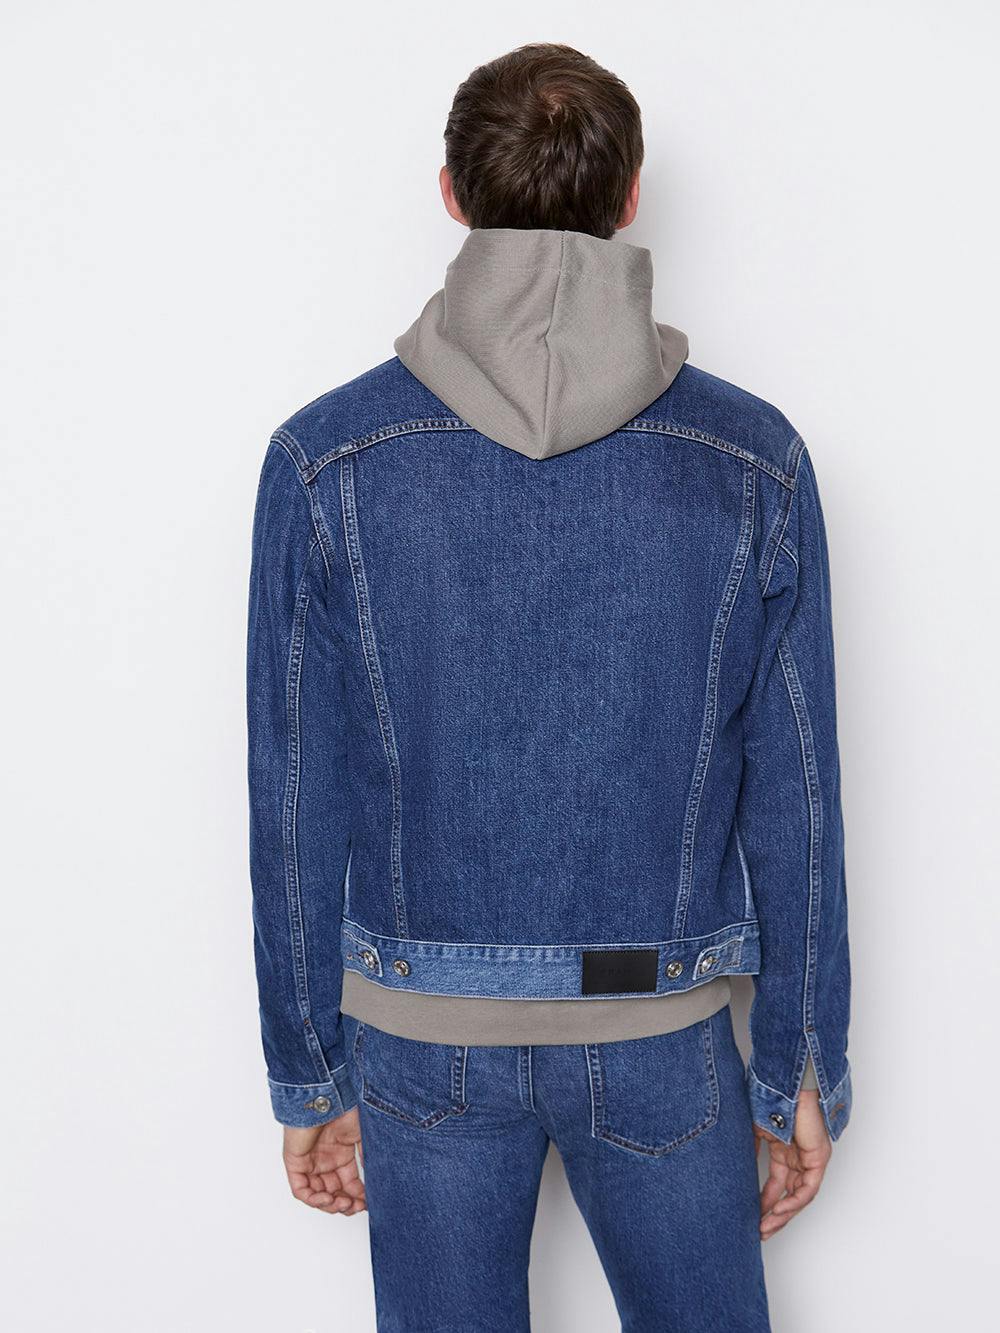 jacket back view